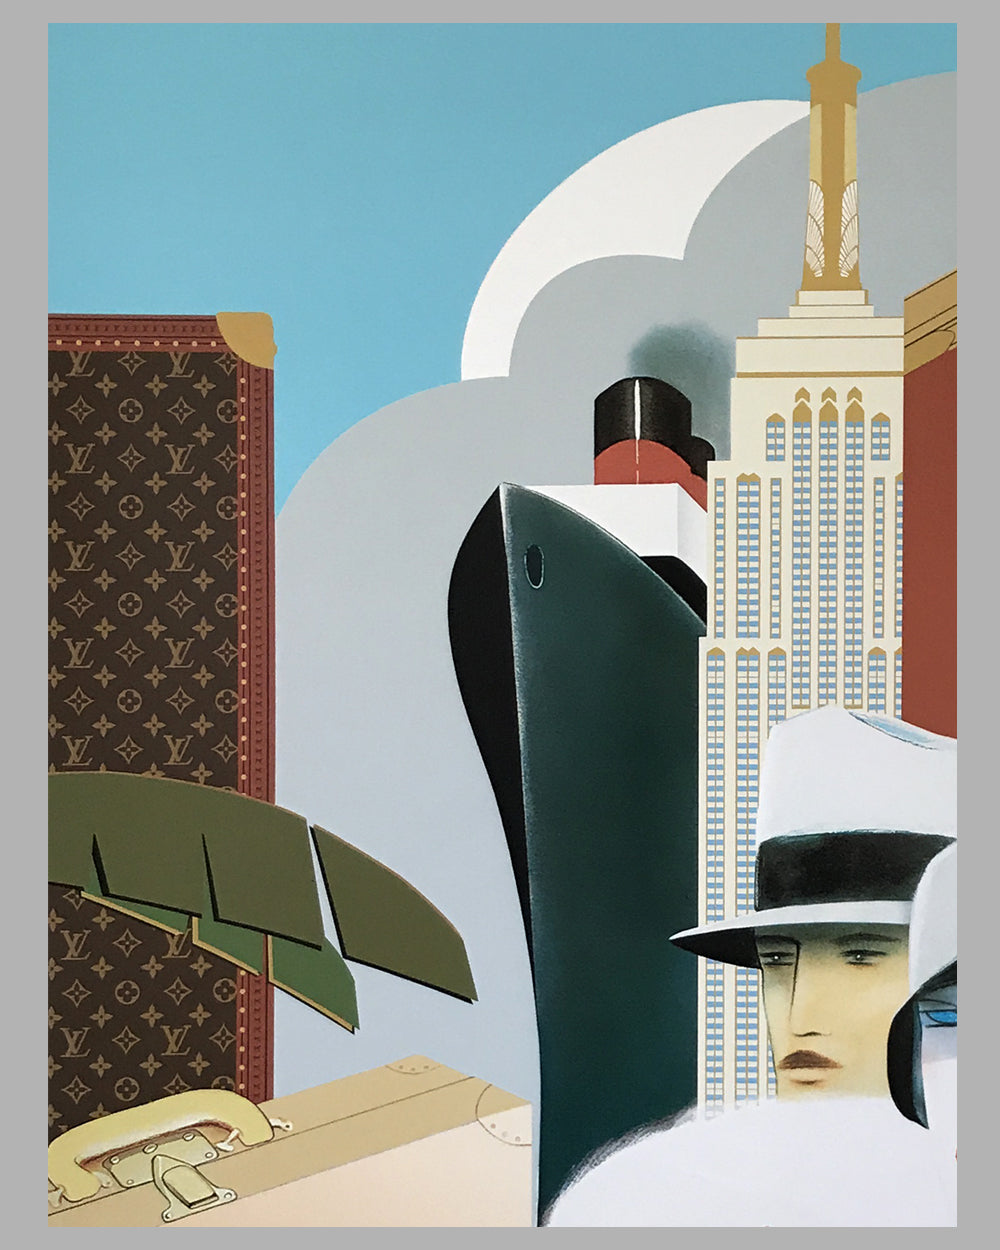 Louis Vuitton Classic at Rockefeller Center 1997 large poster by Razzia